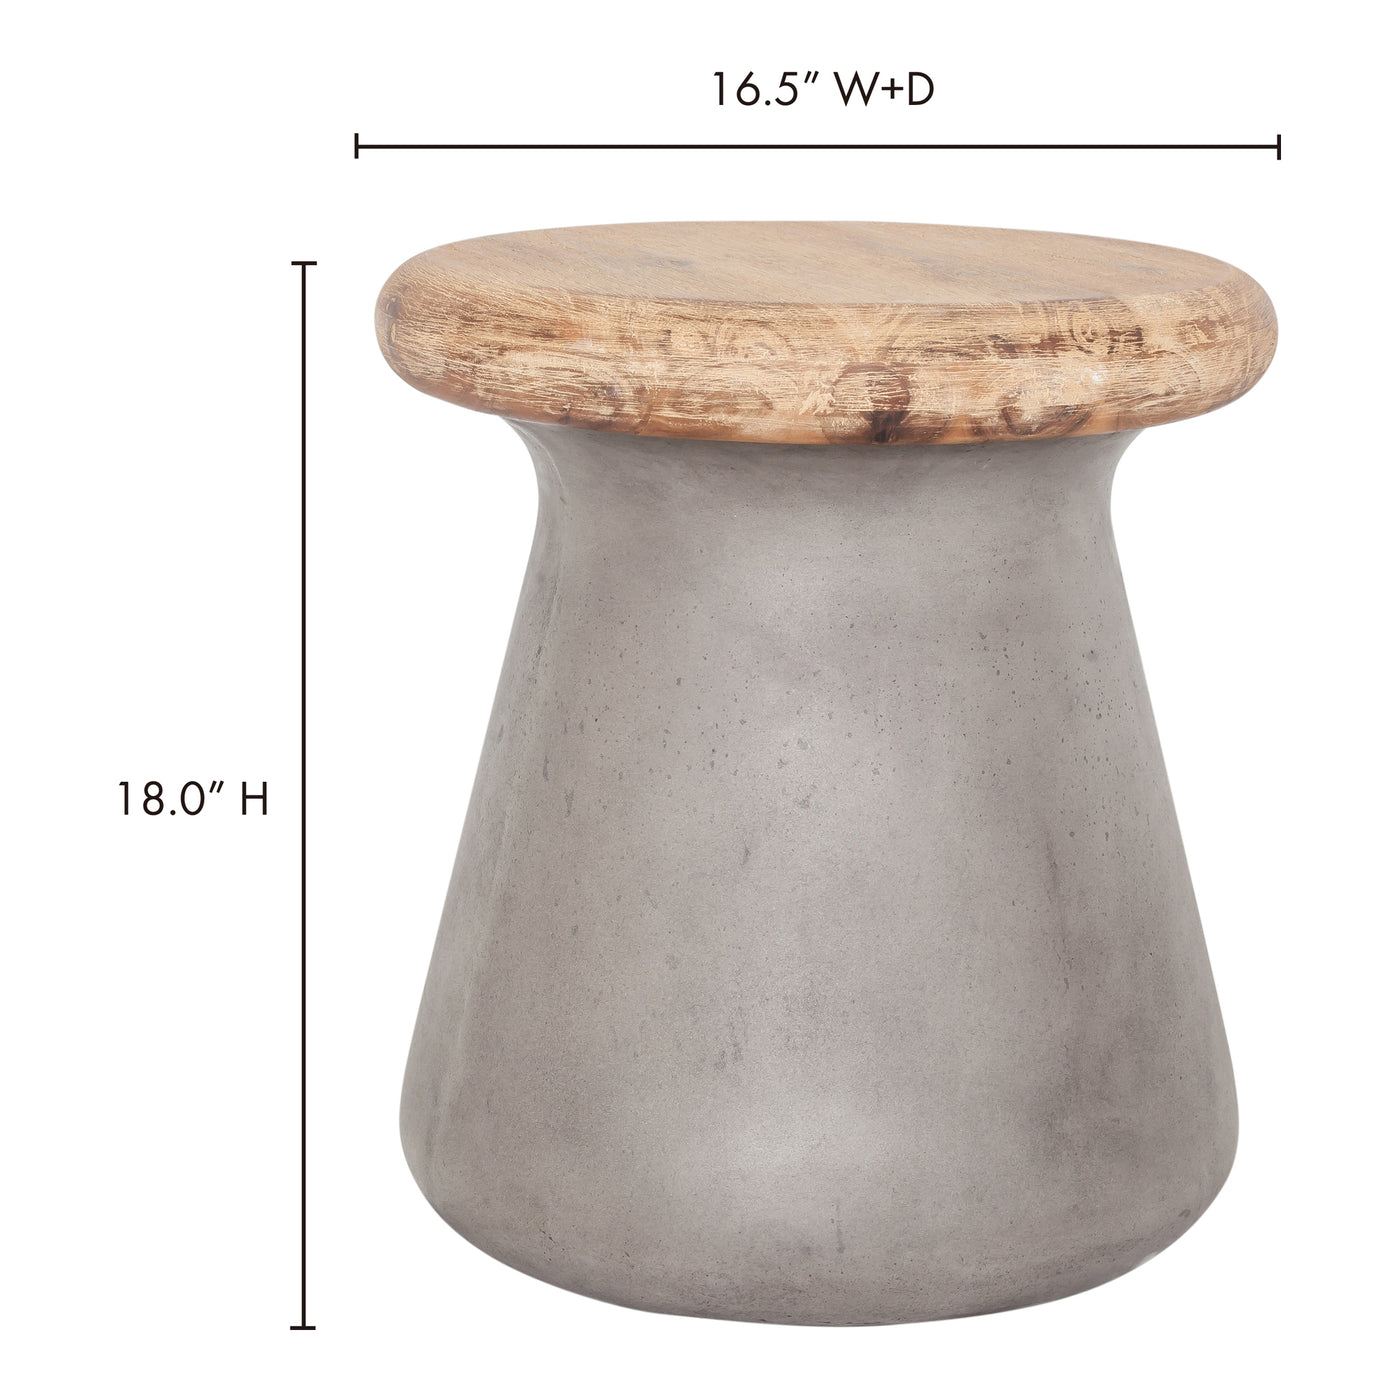 This outdoor stool is made of a high-quality concrete and fiber mix, giving it a cool modern look, but keeping it light-we...